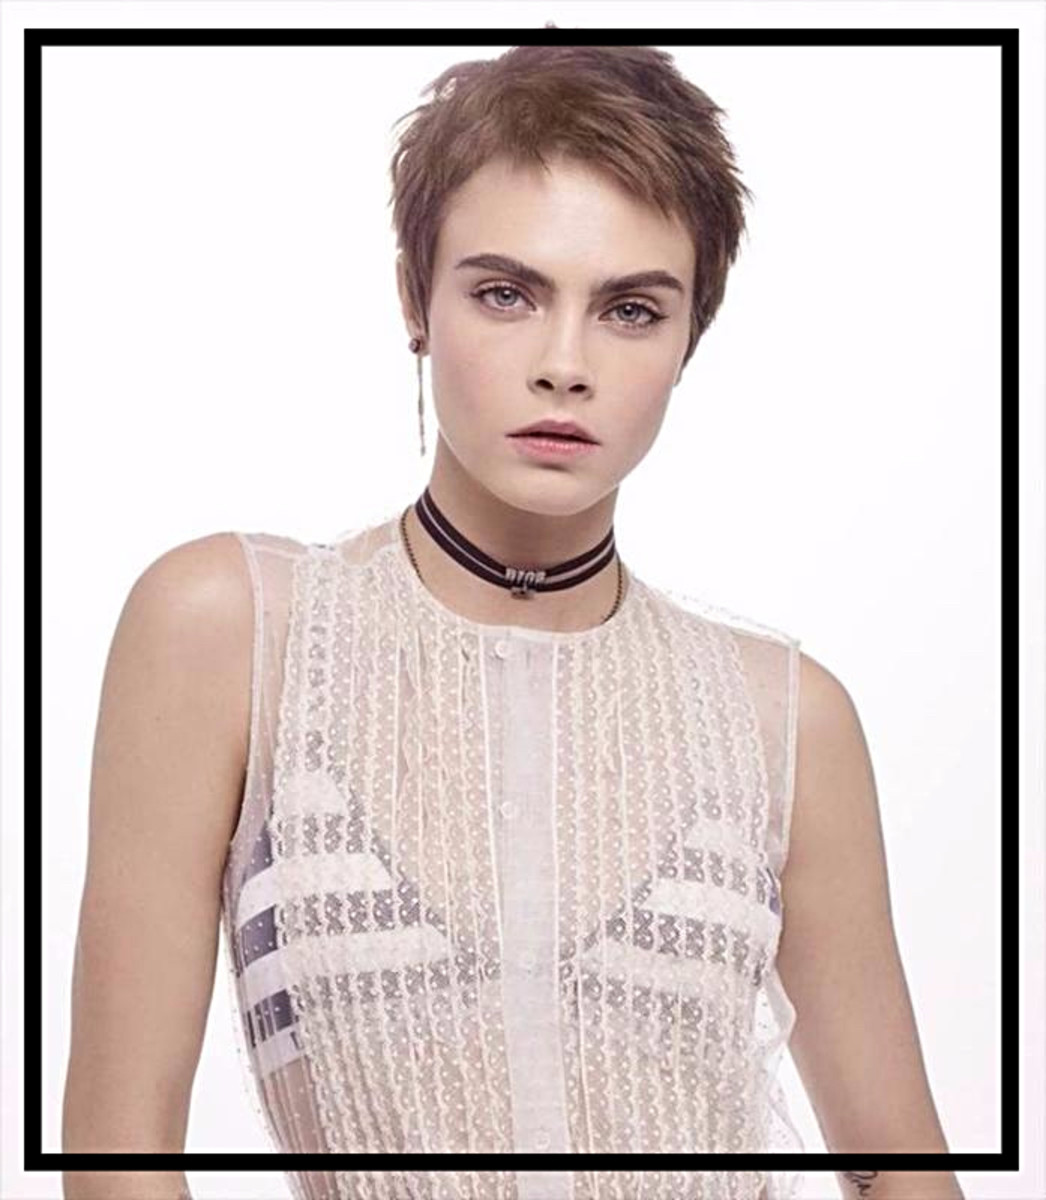 Cara Delevingne for Dior Capture Youth. Photo: Courtesy of Dior